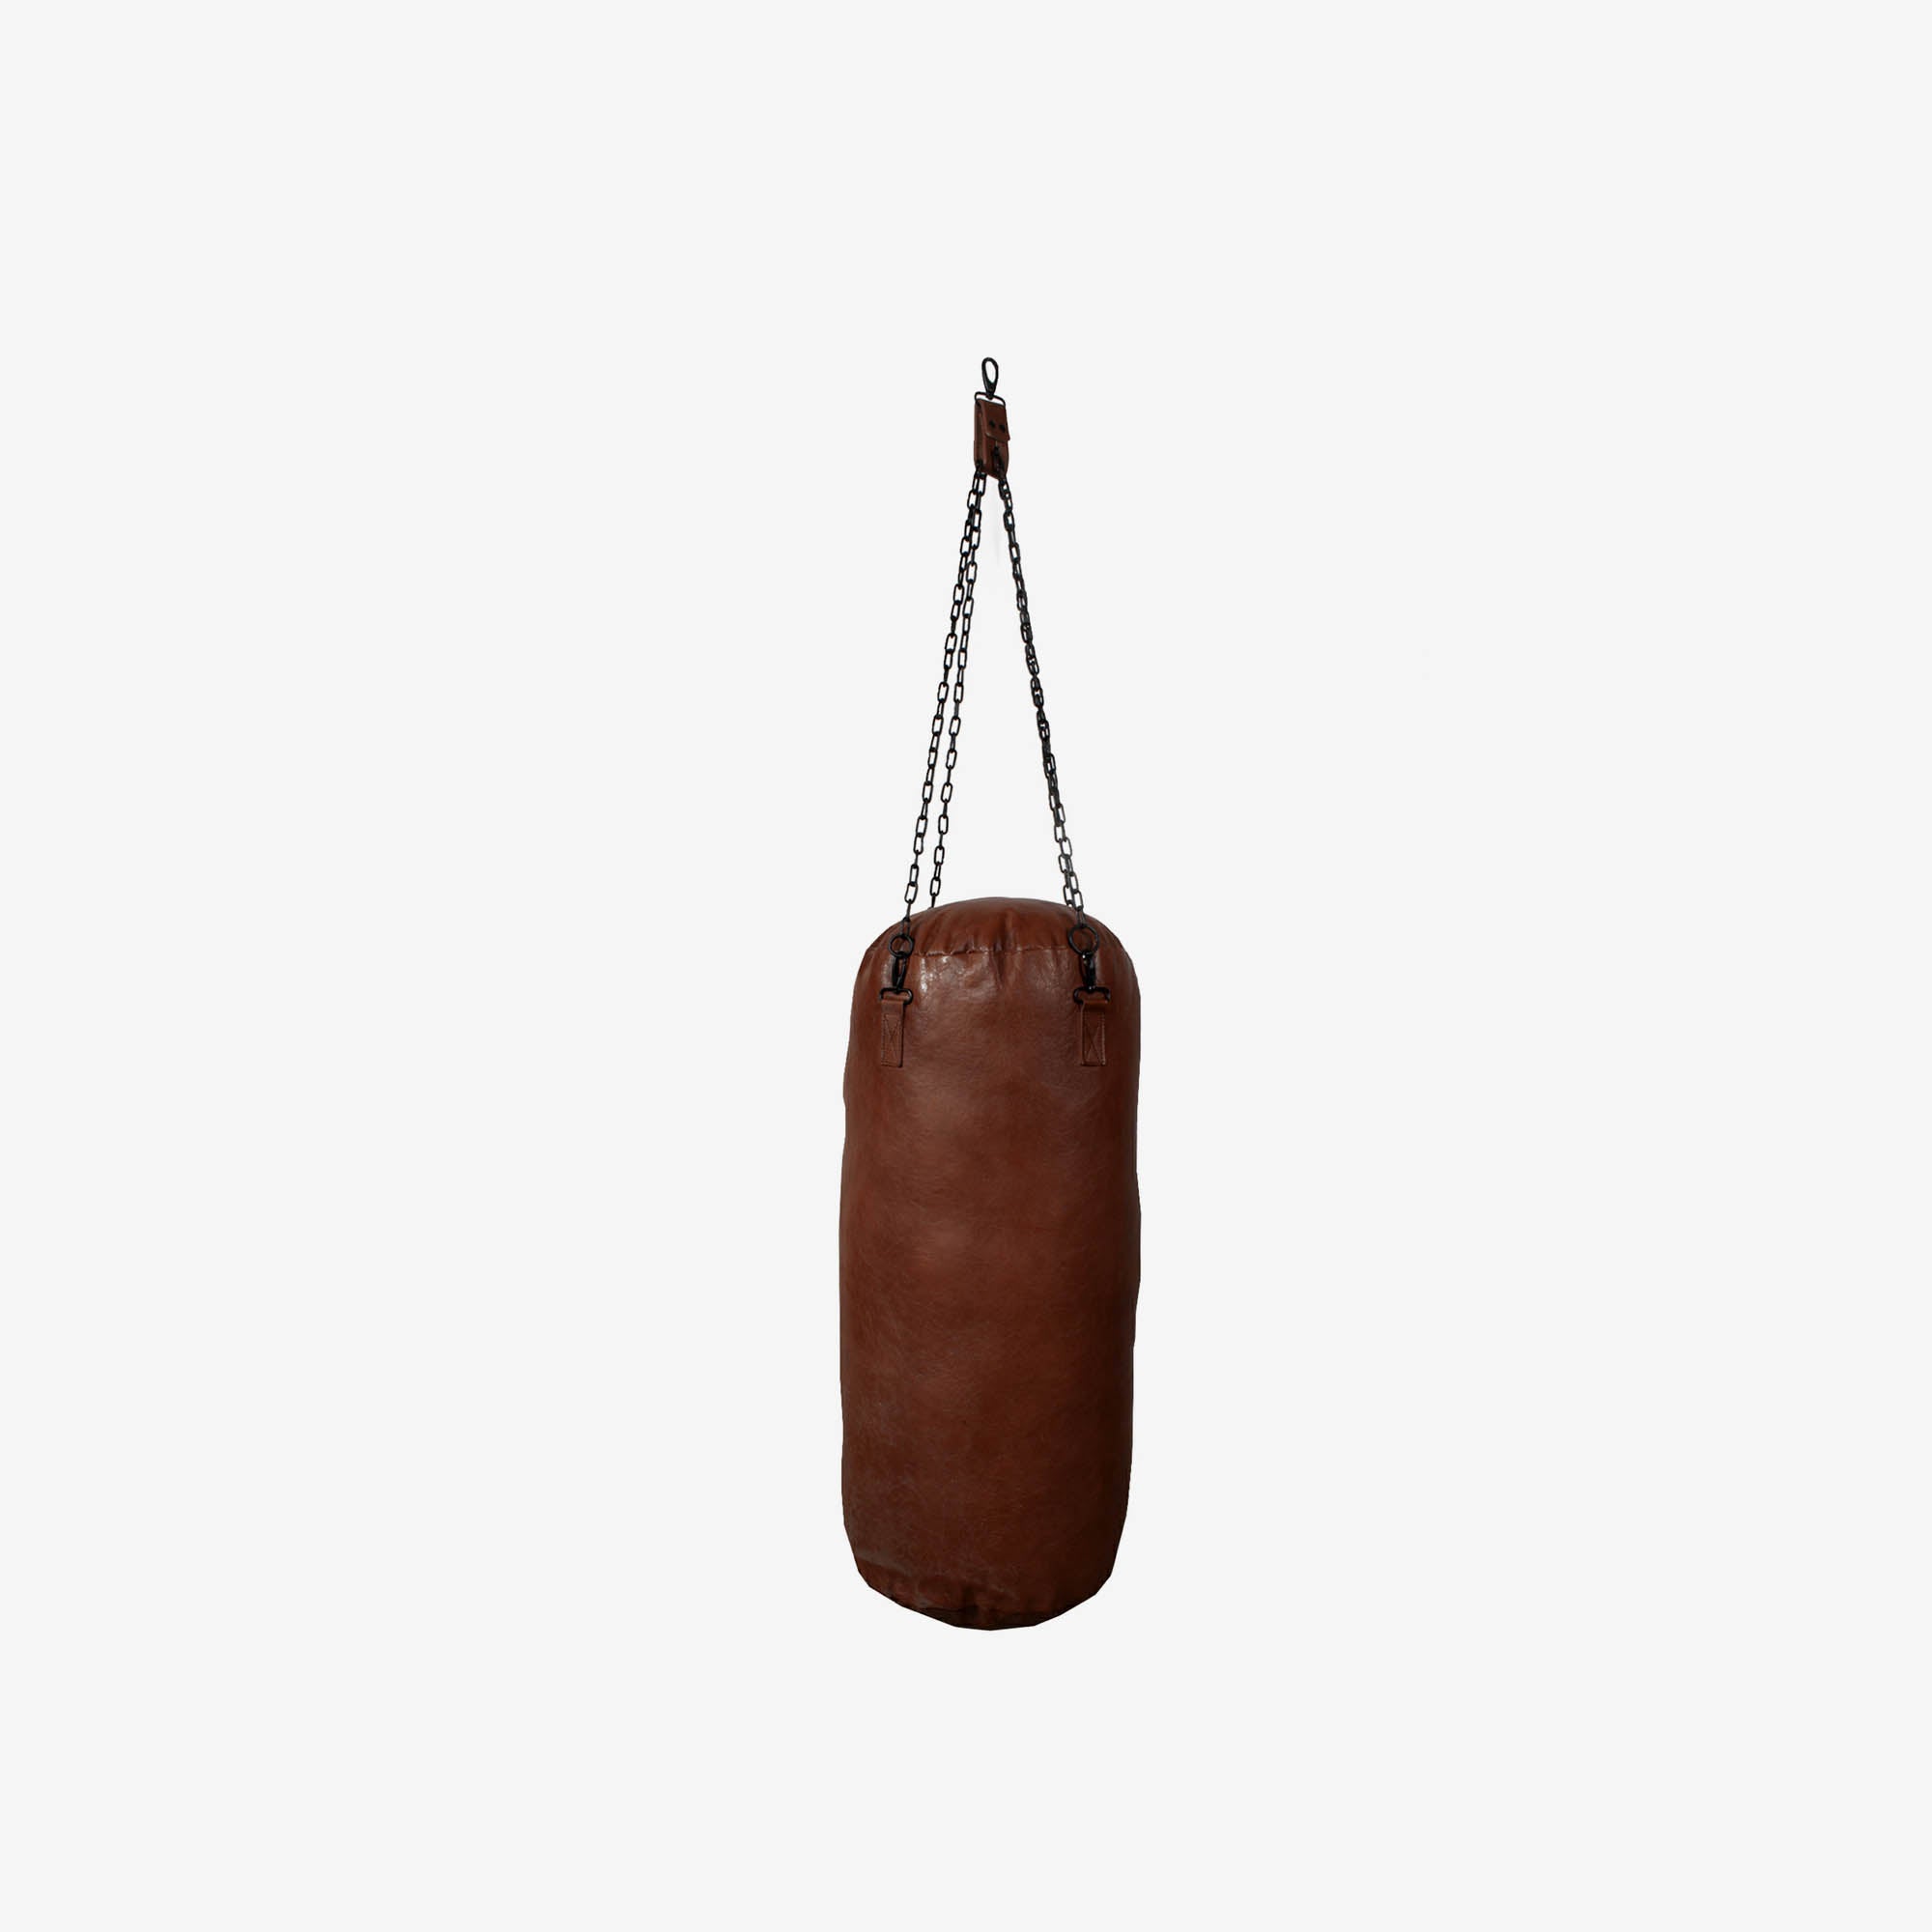 Leater punching bag small – large h68xdsn.32cm